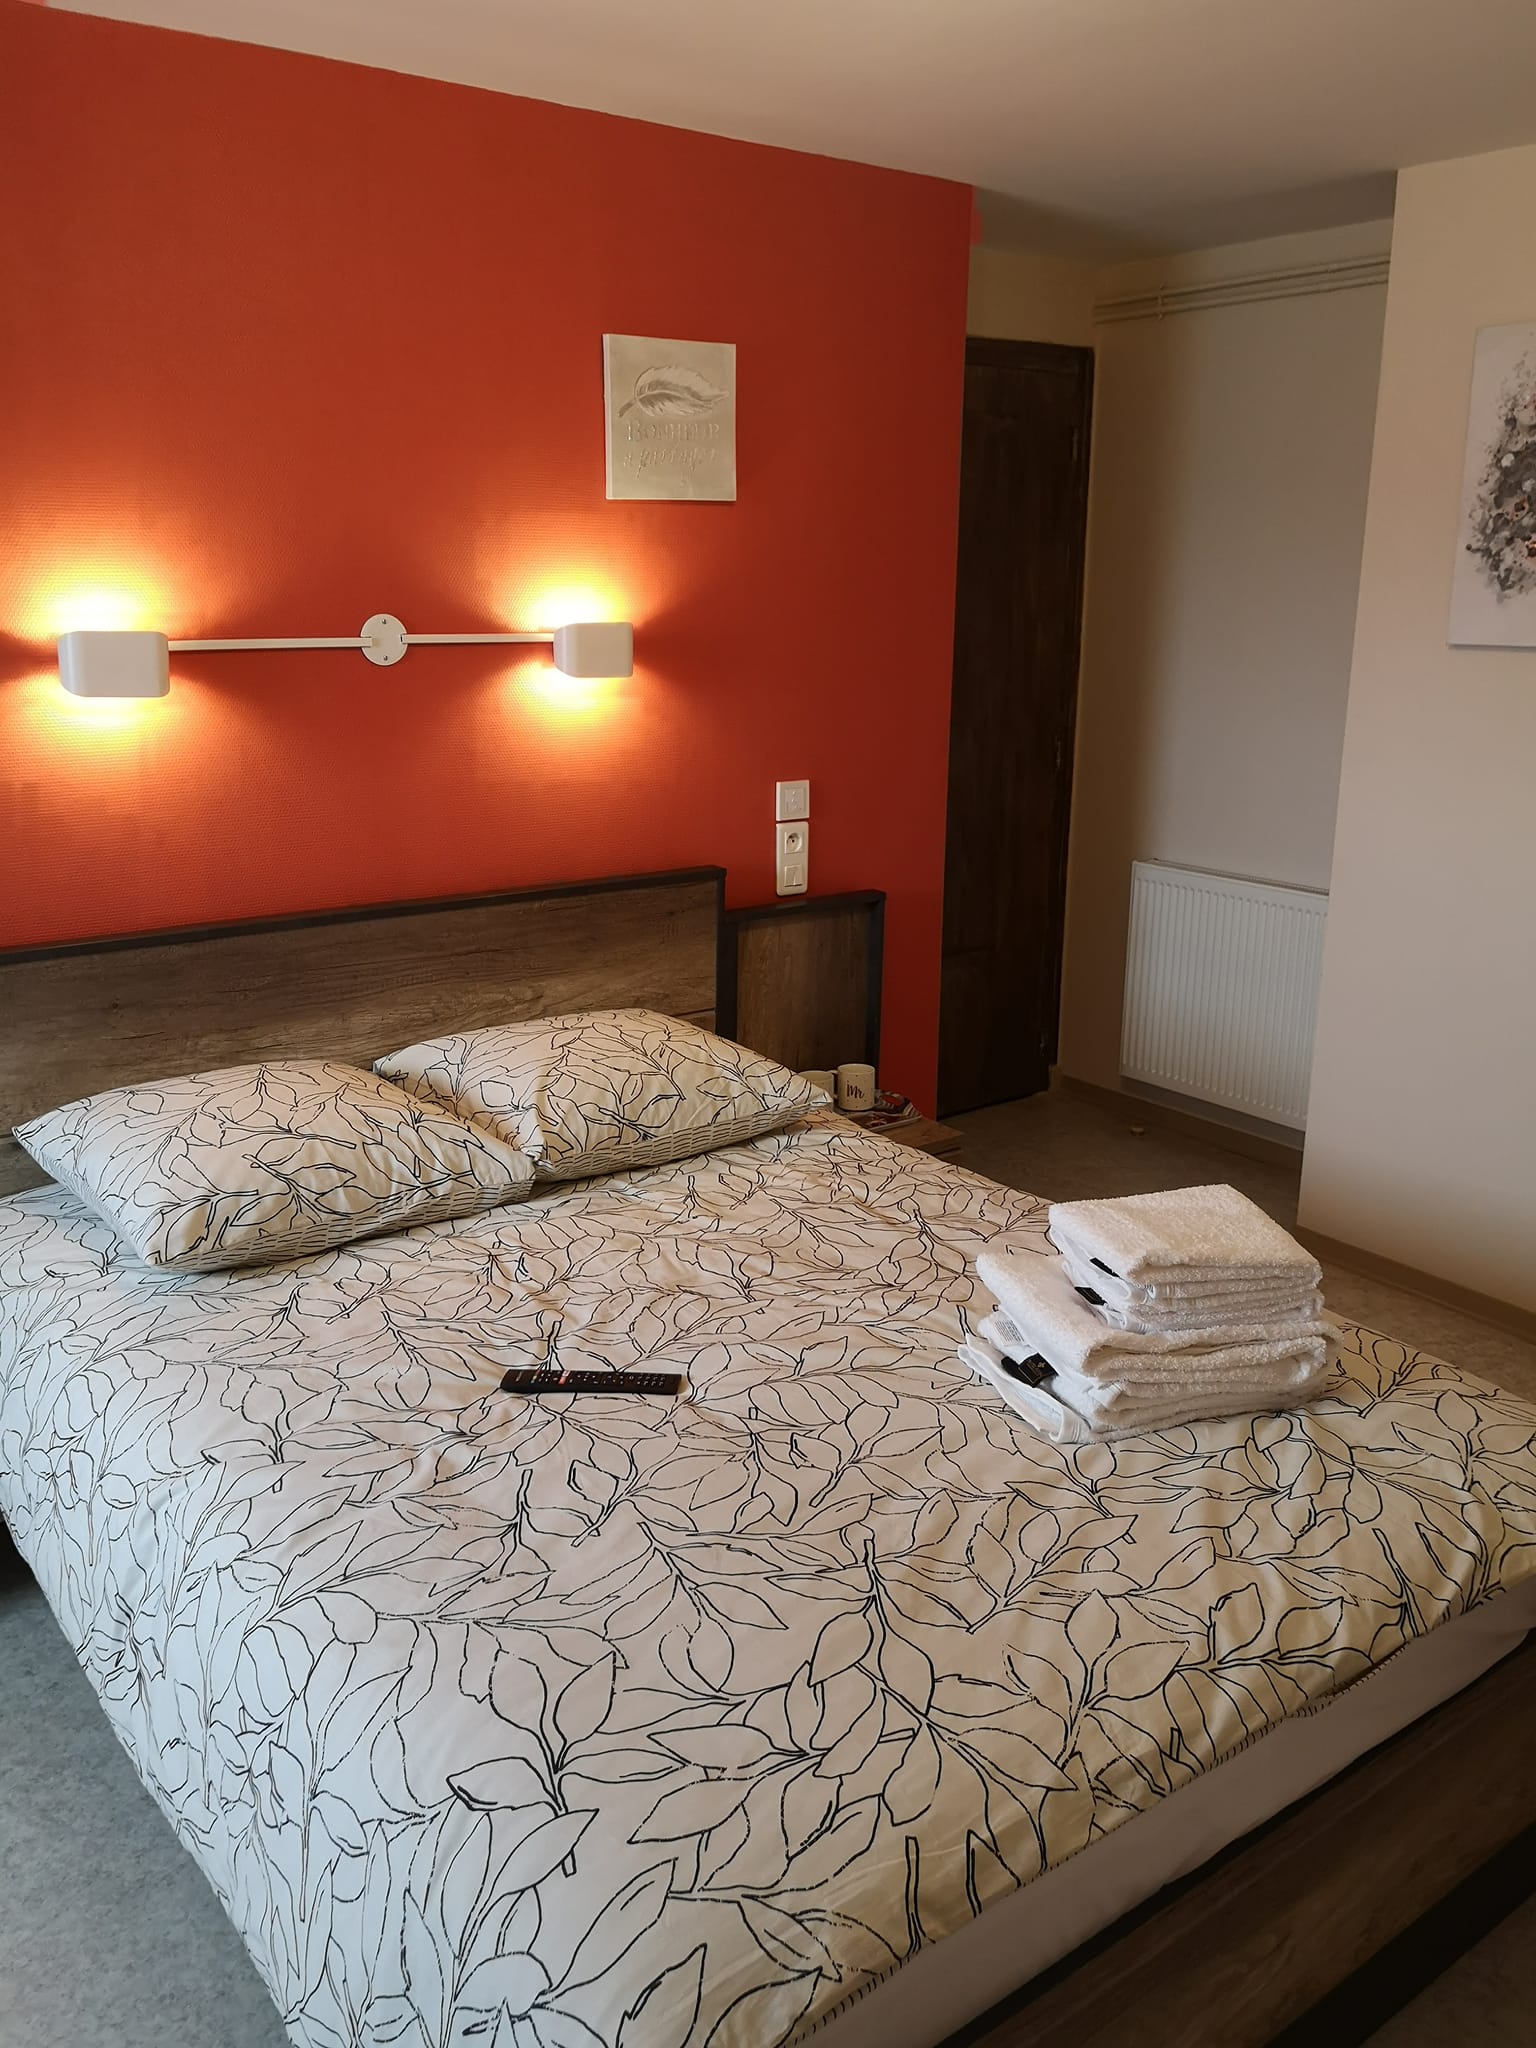 ChambresDhotes-AubergeQuatreRoutesAlbussac-chambre_1